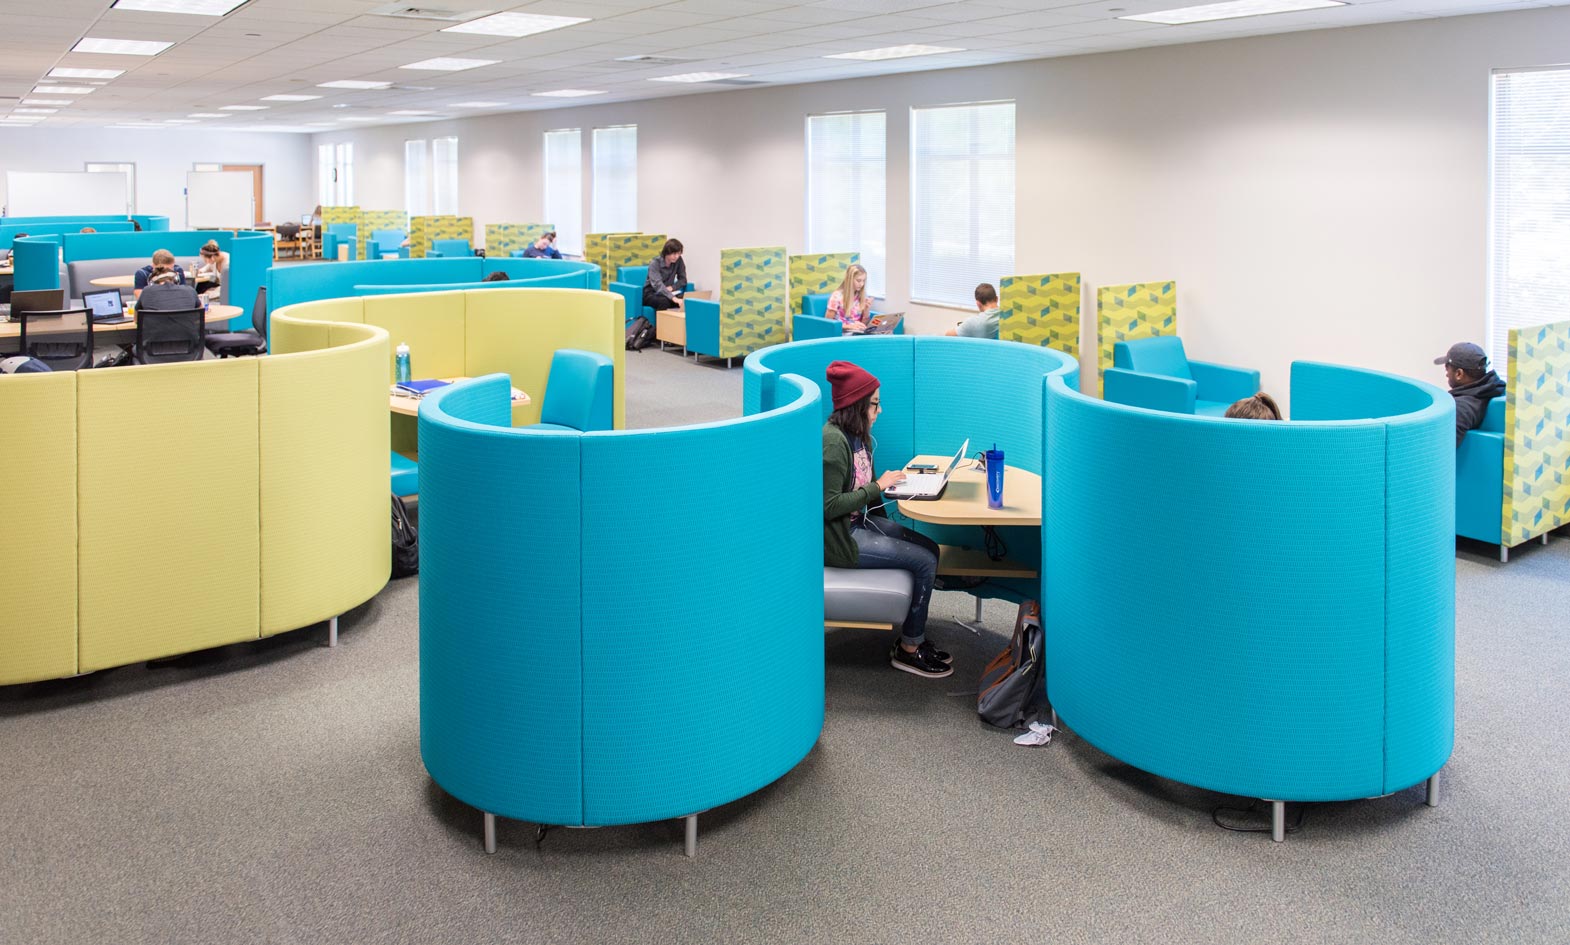 university library with study pods furniture